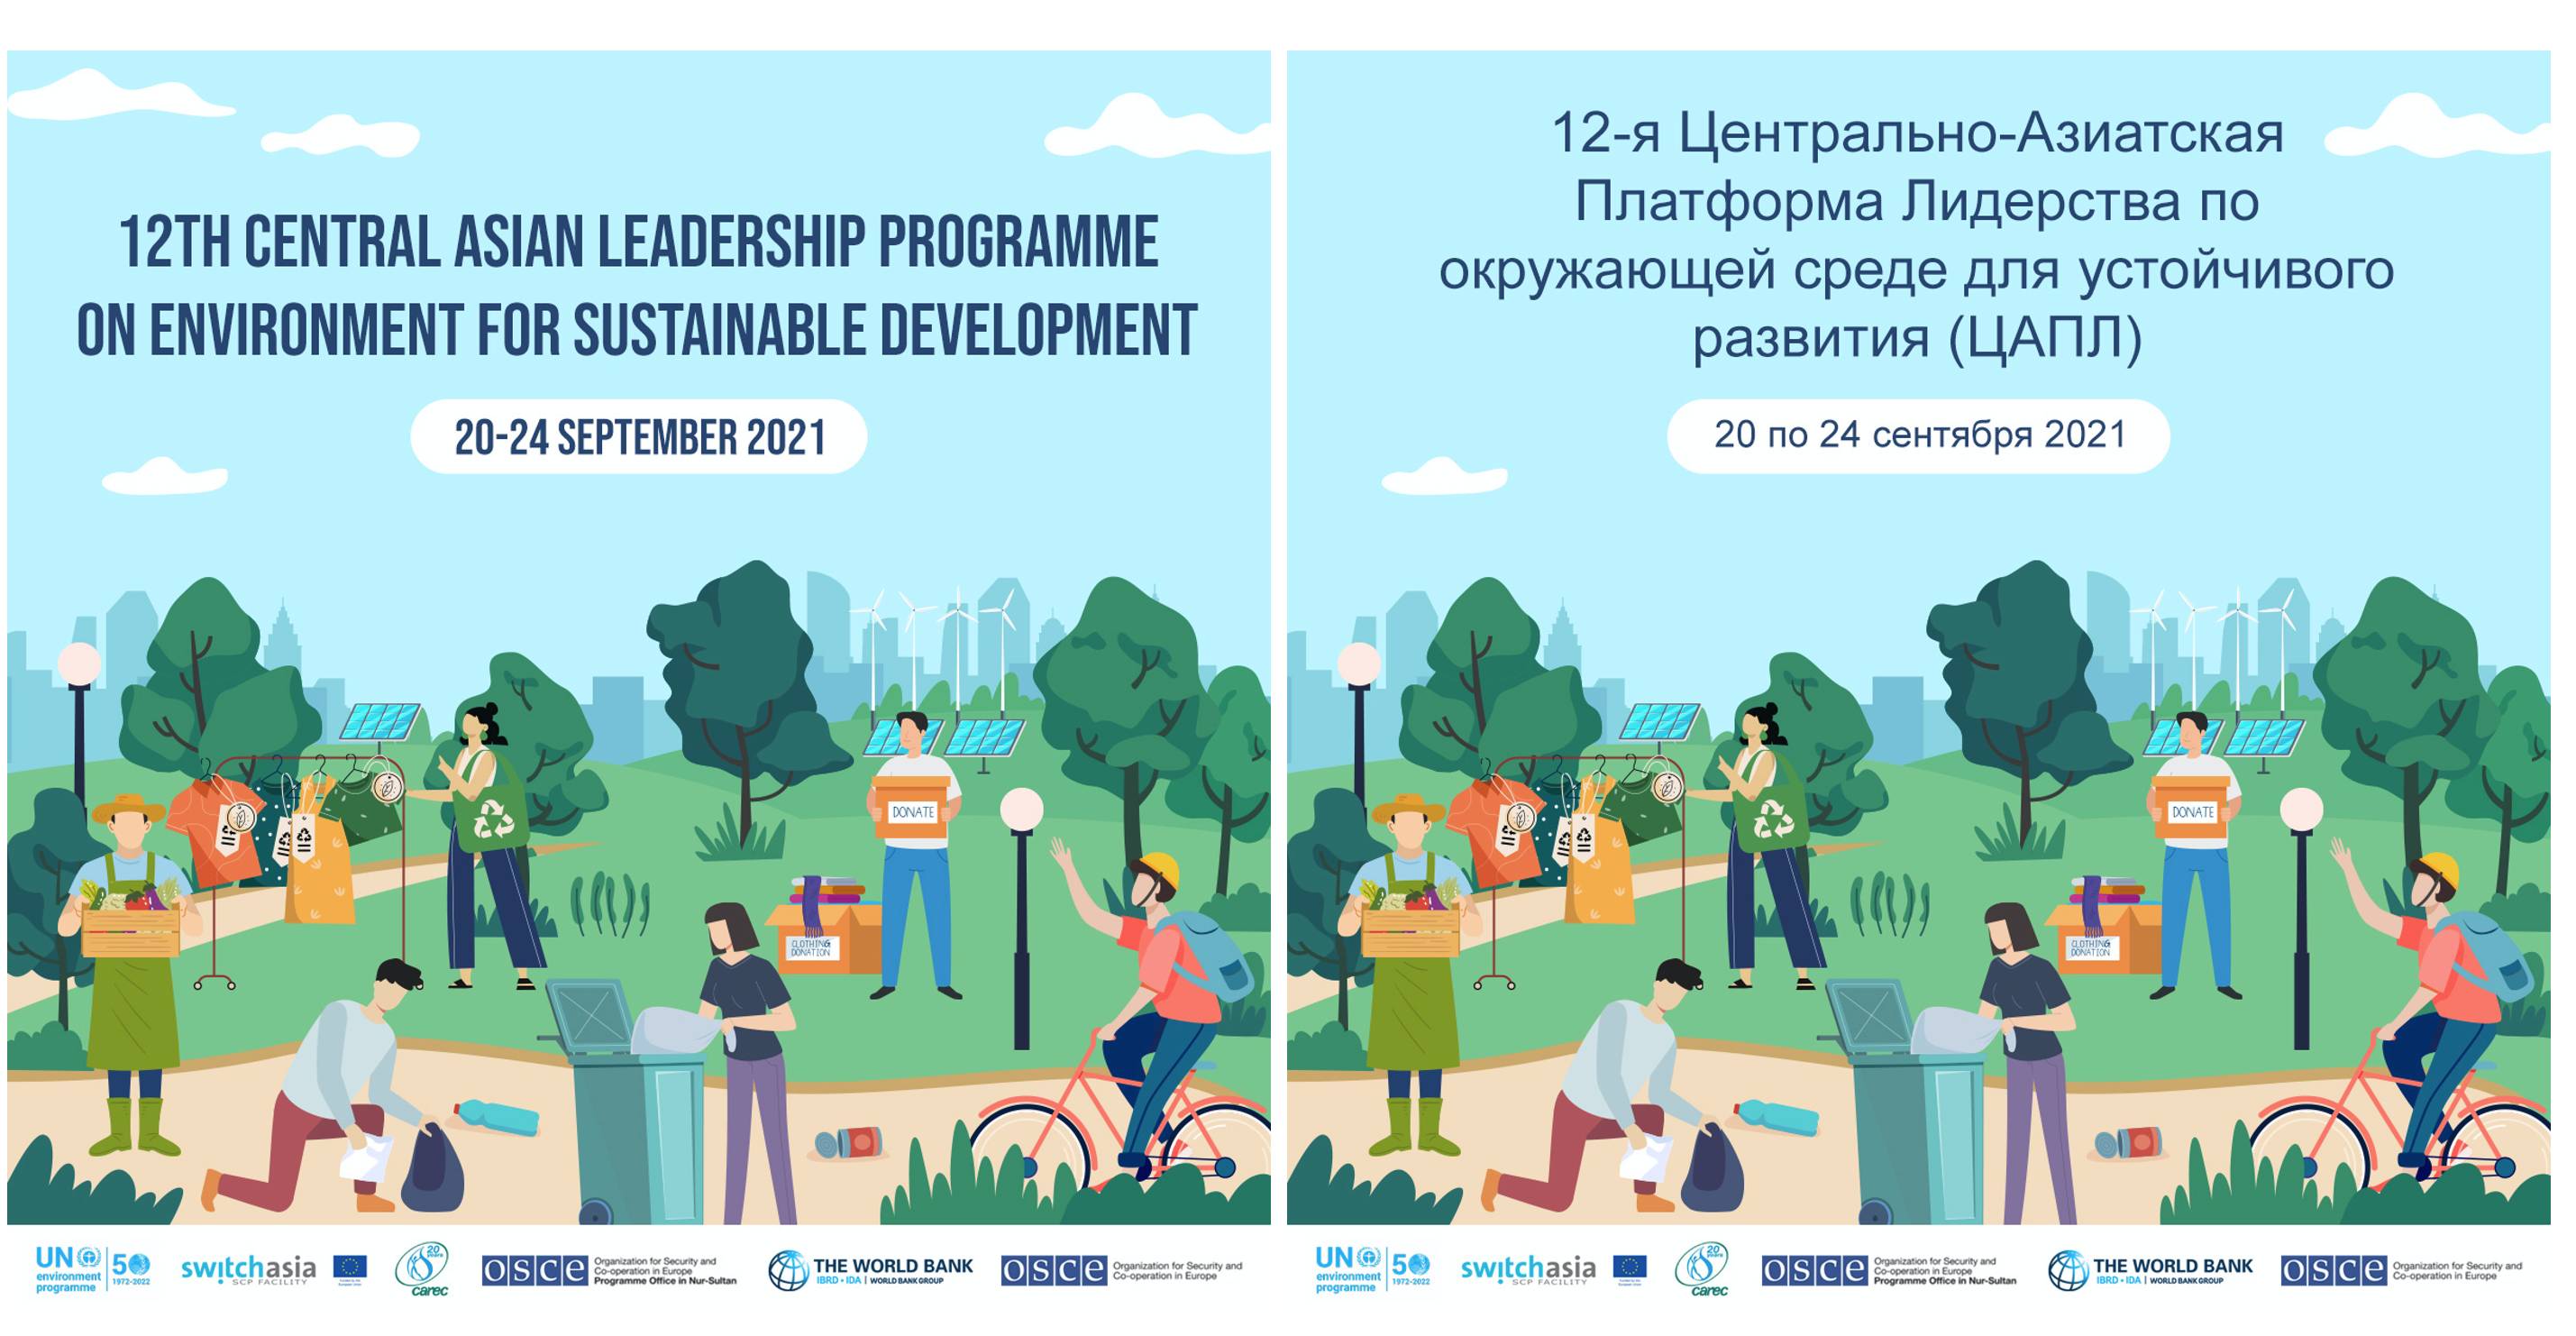 12th Central Asian Leadership Programme on Environment for Sustainable Development